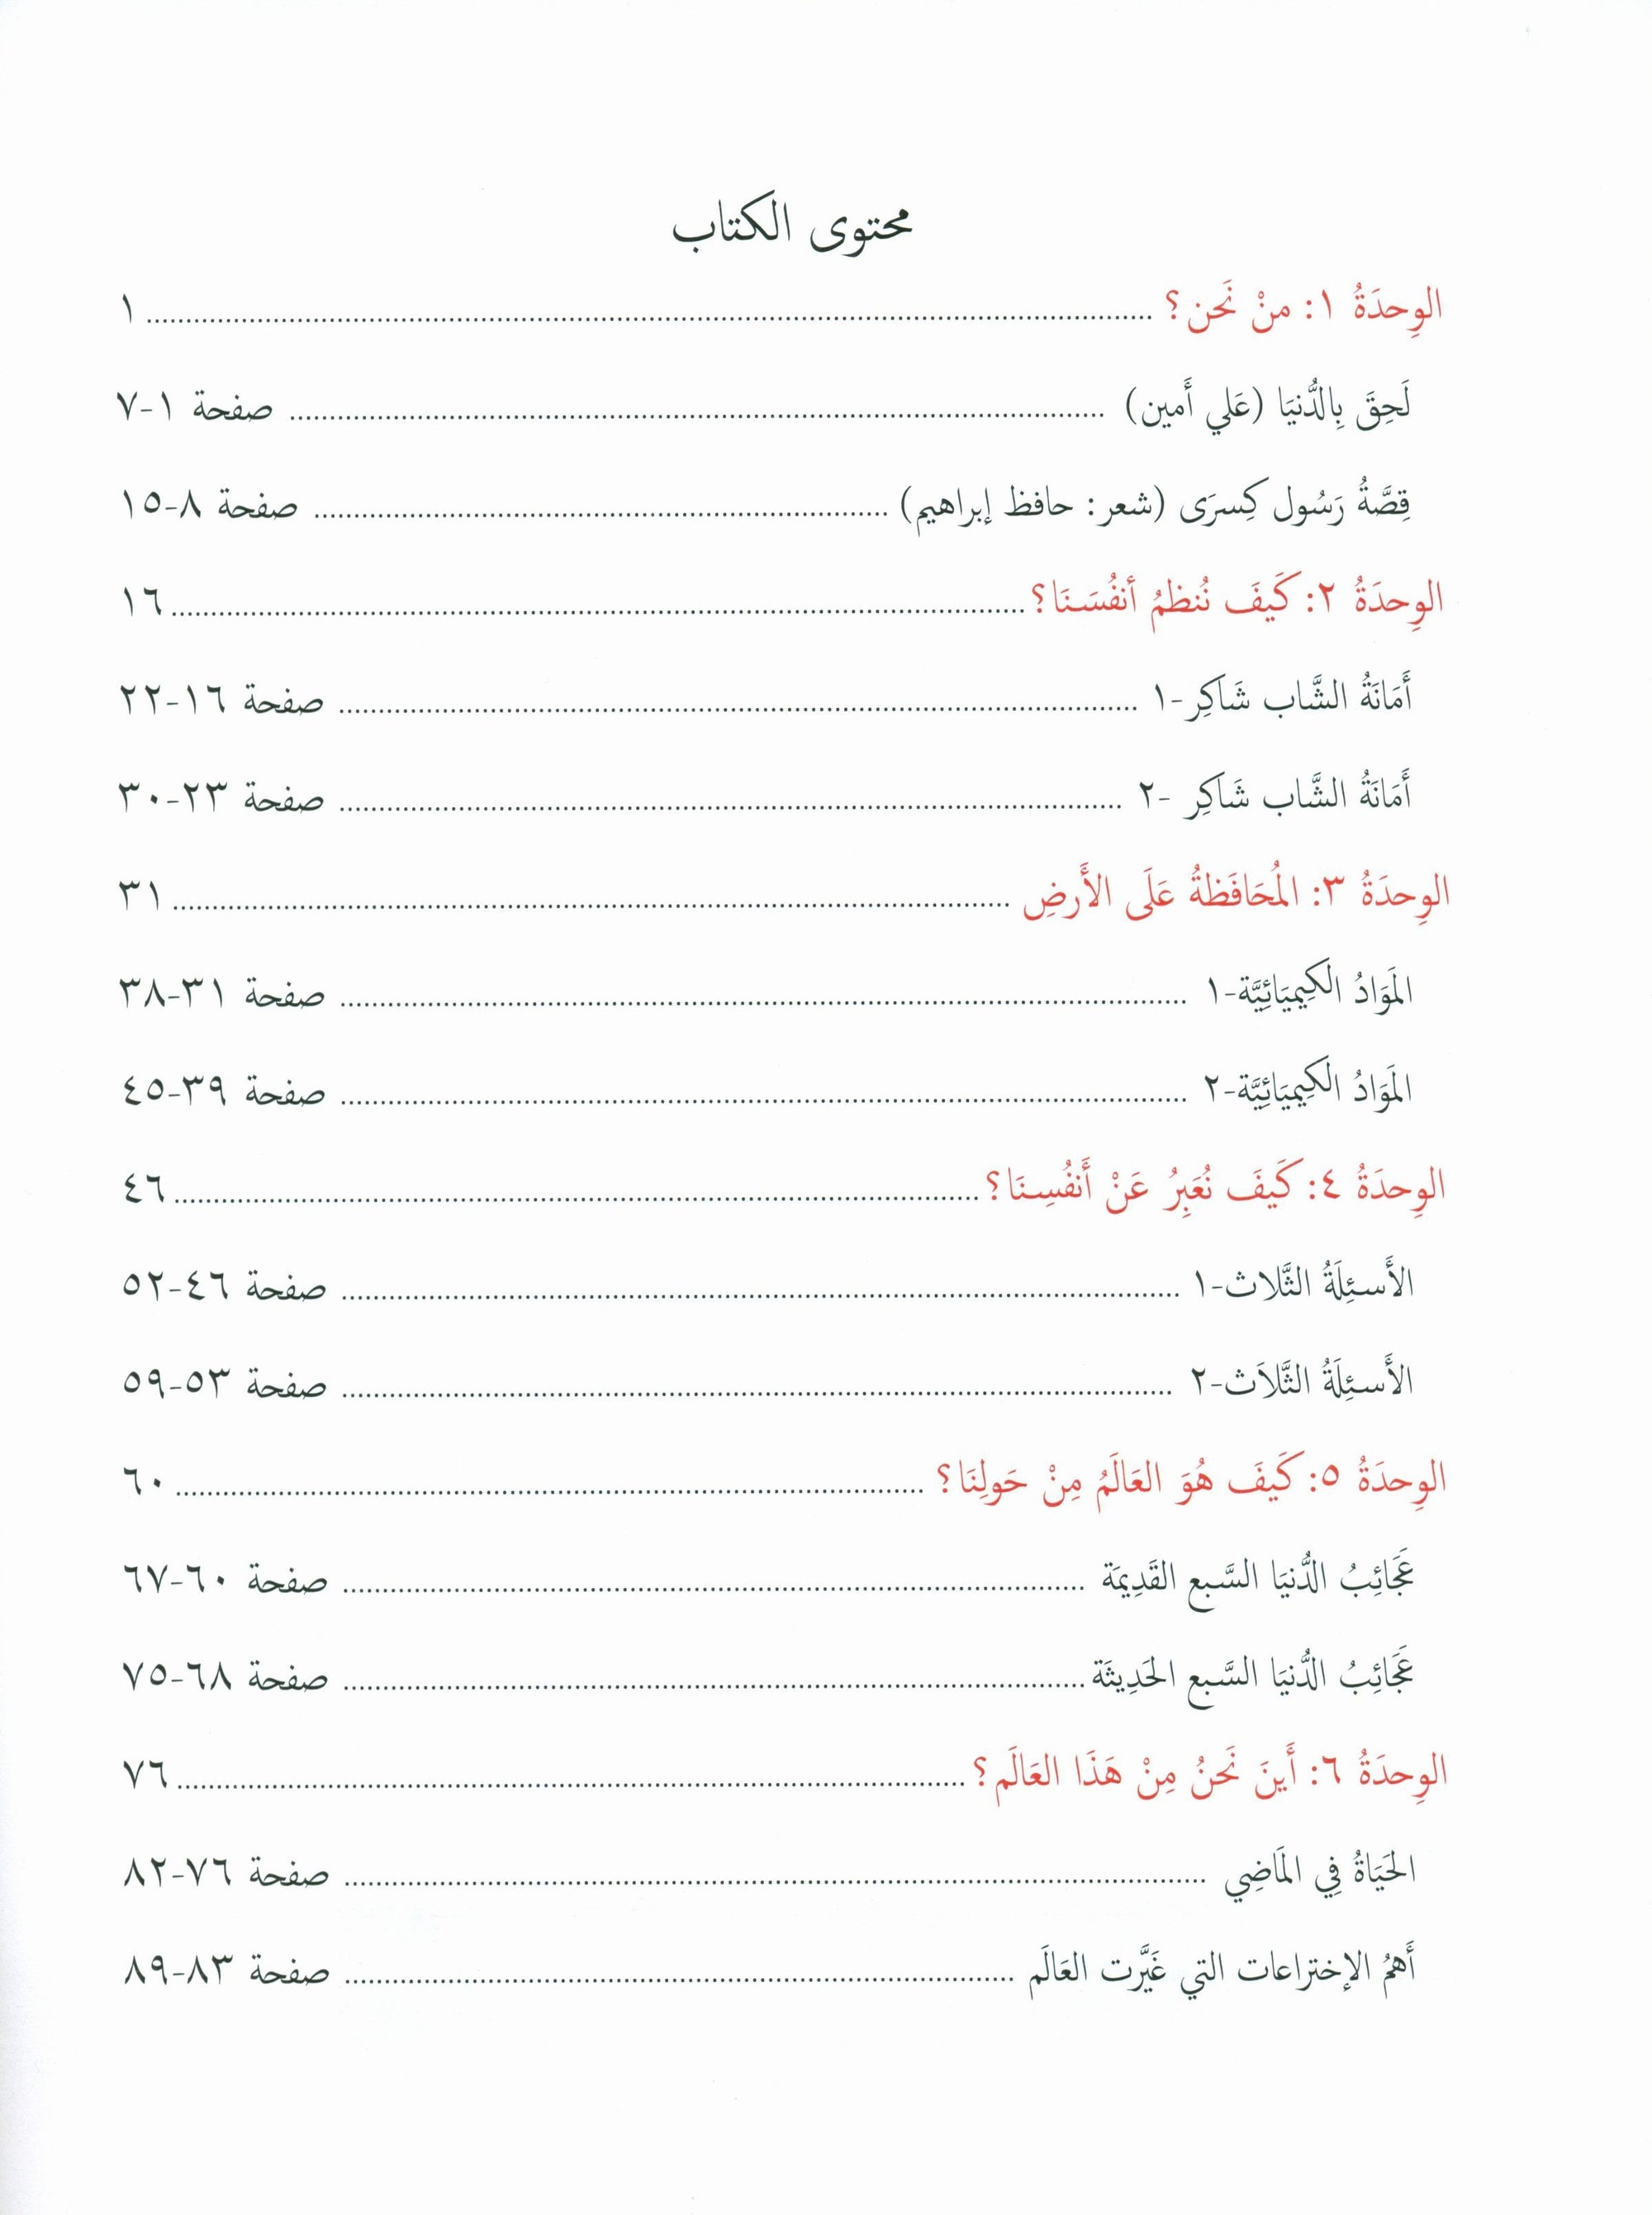 Our Language Is Our Pride Reading Level 8 لغتنا فخرنا